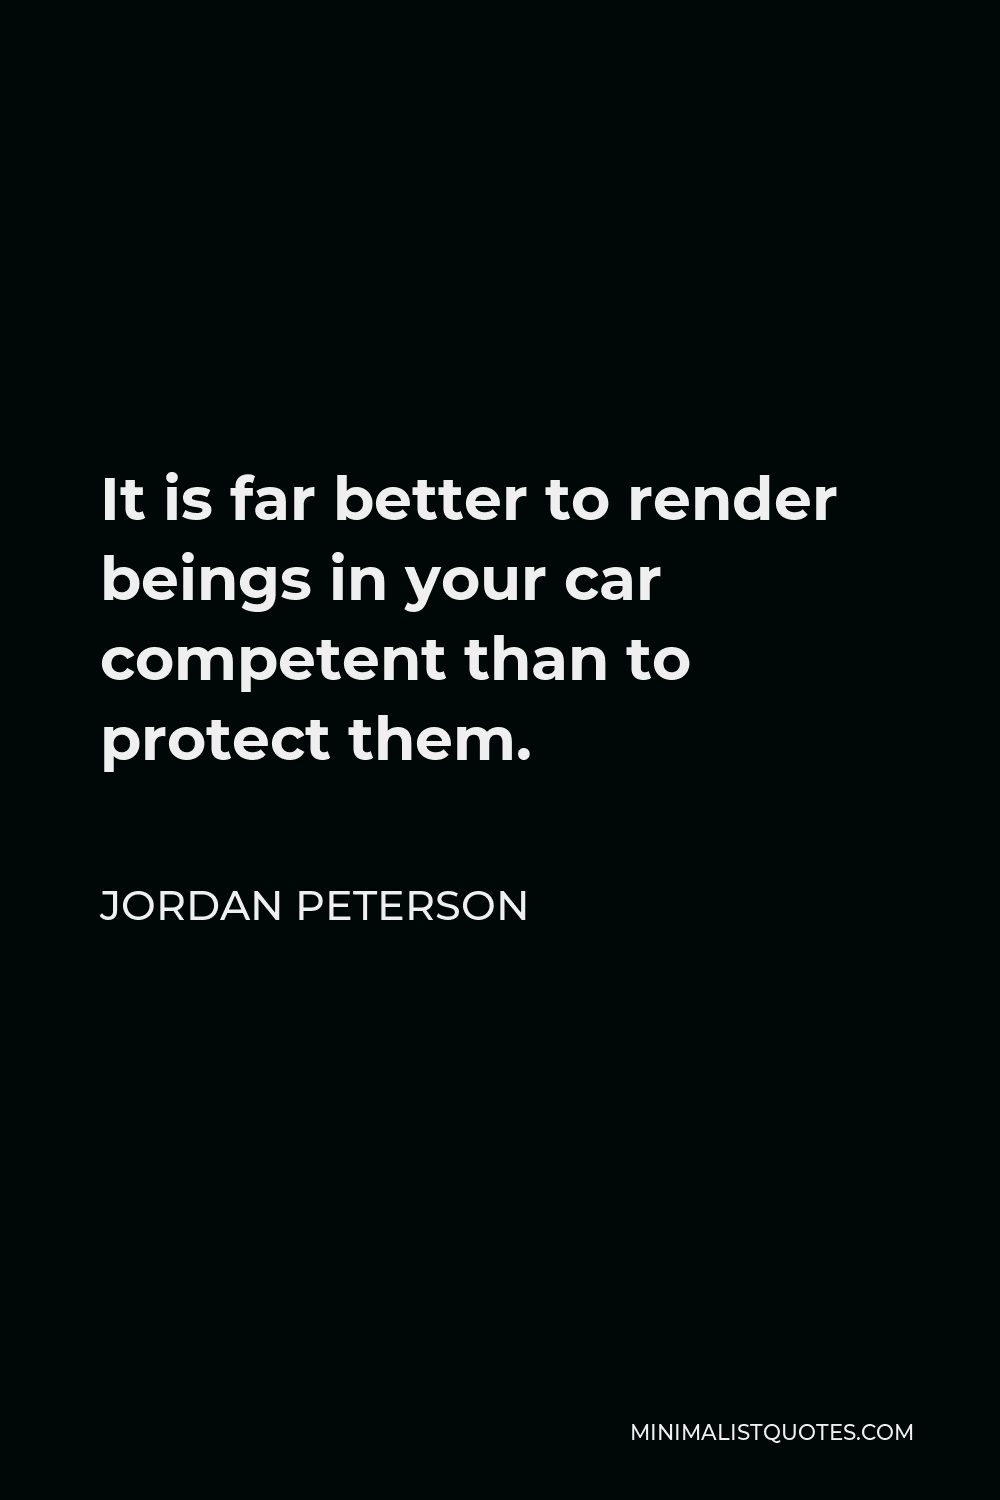 Jordan Peterson Quote - It is far better to render beings in your car competent than to protect them.